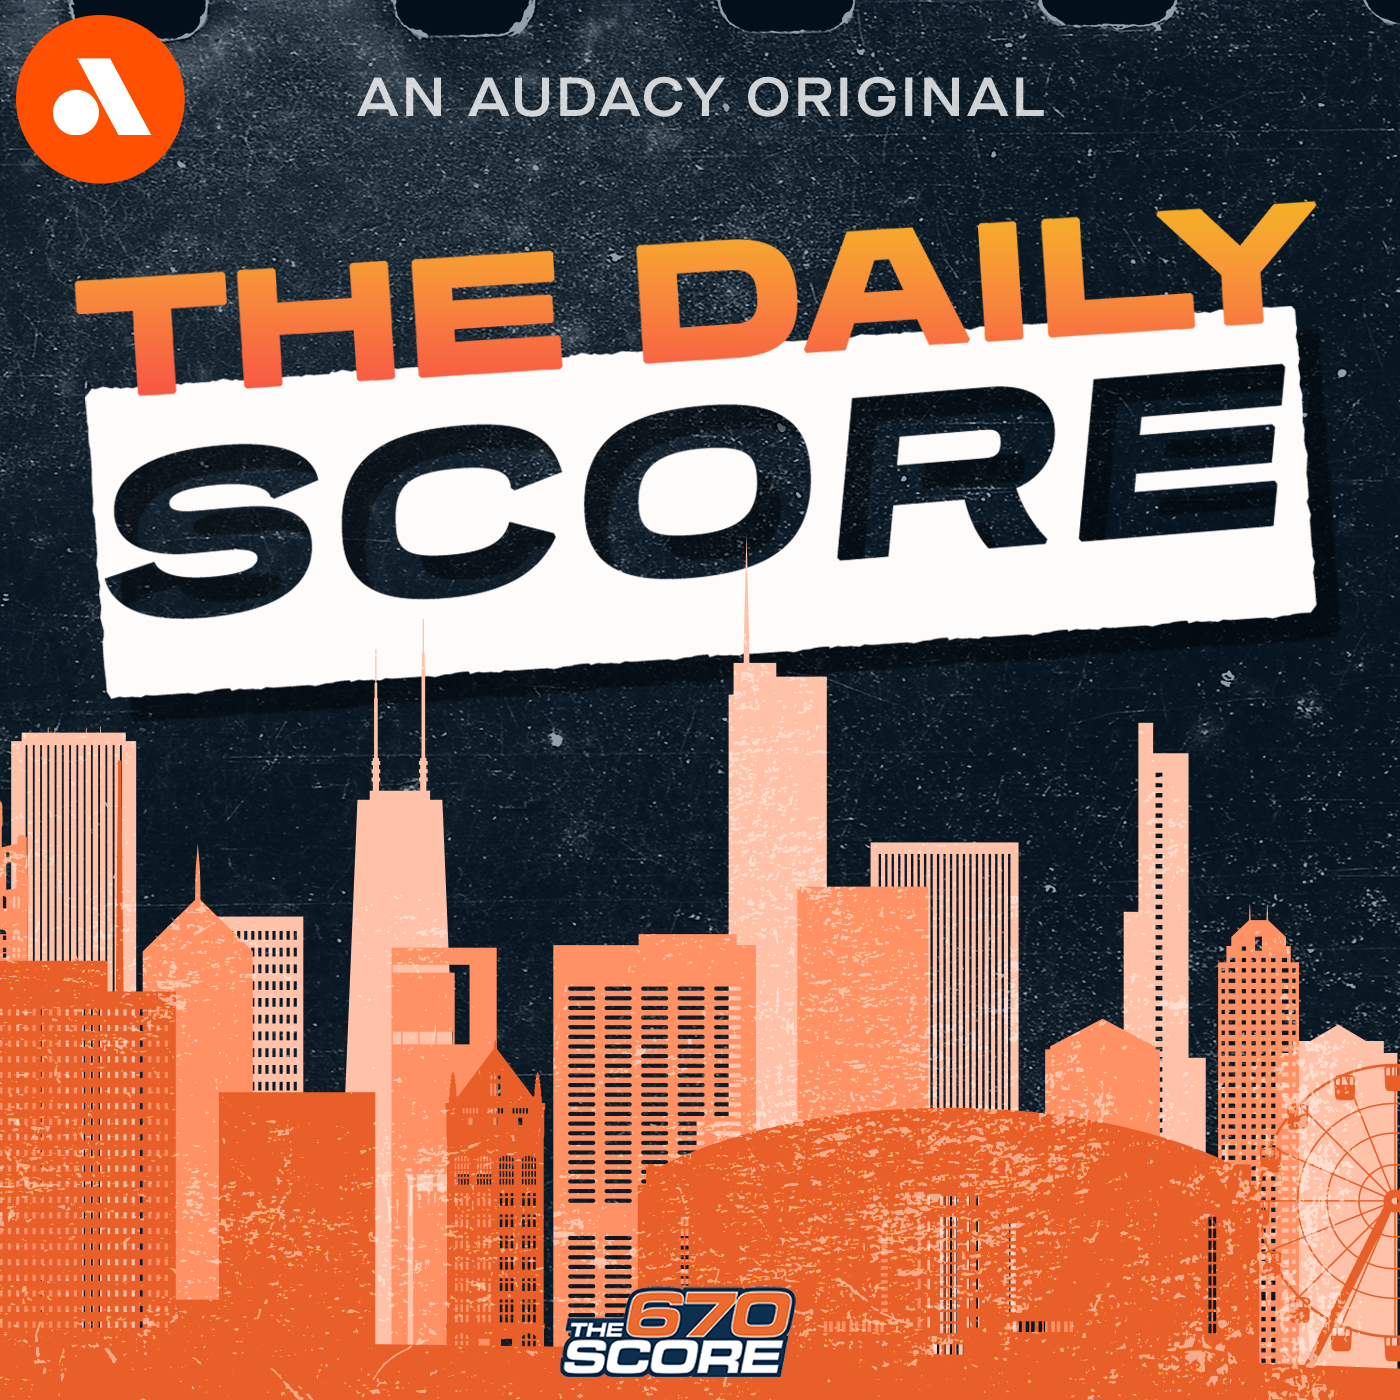 Cubs take 2 of 3 in Seattle | The Daily Score